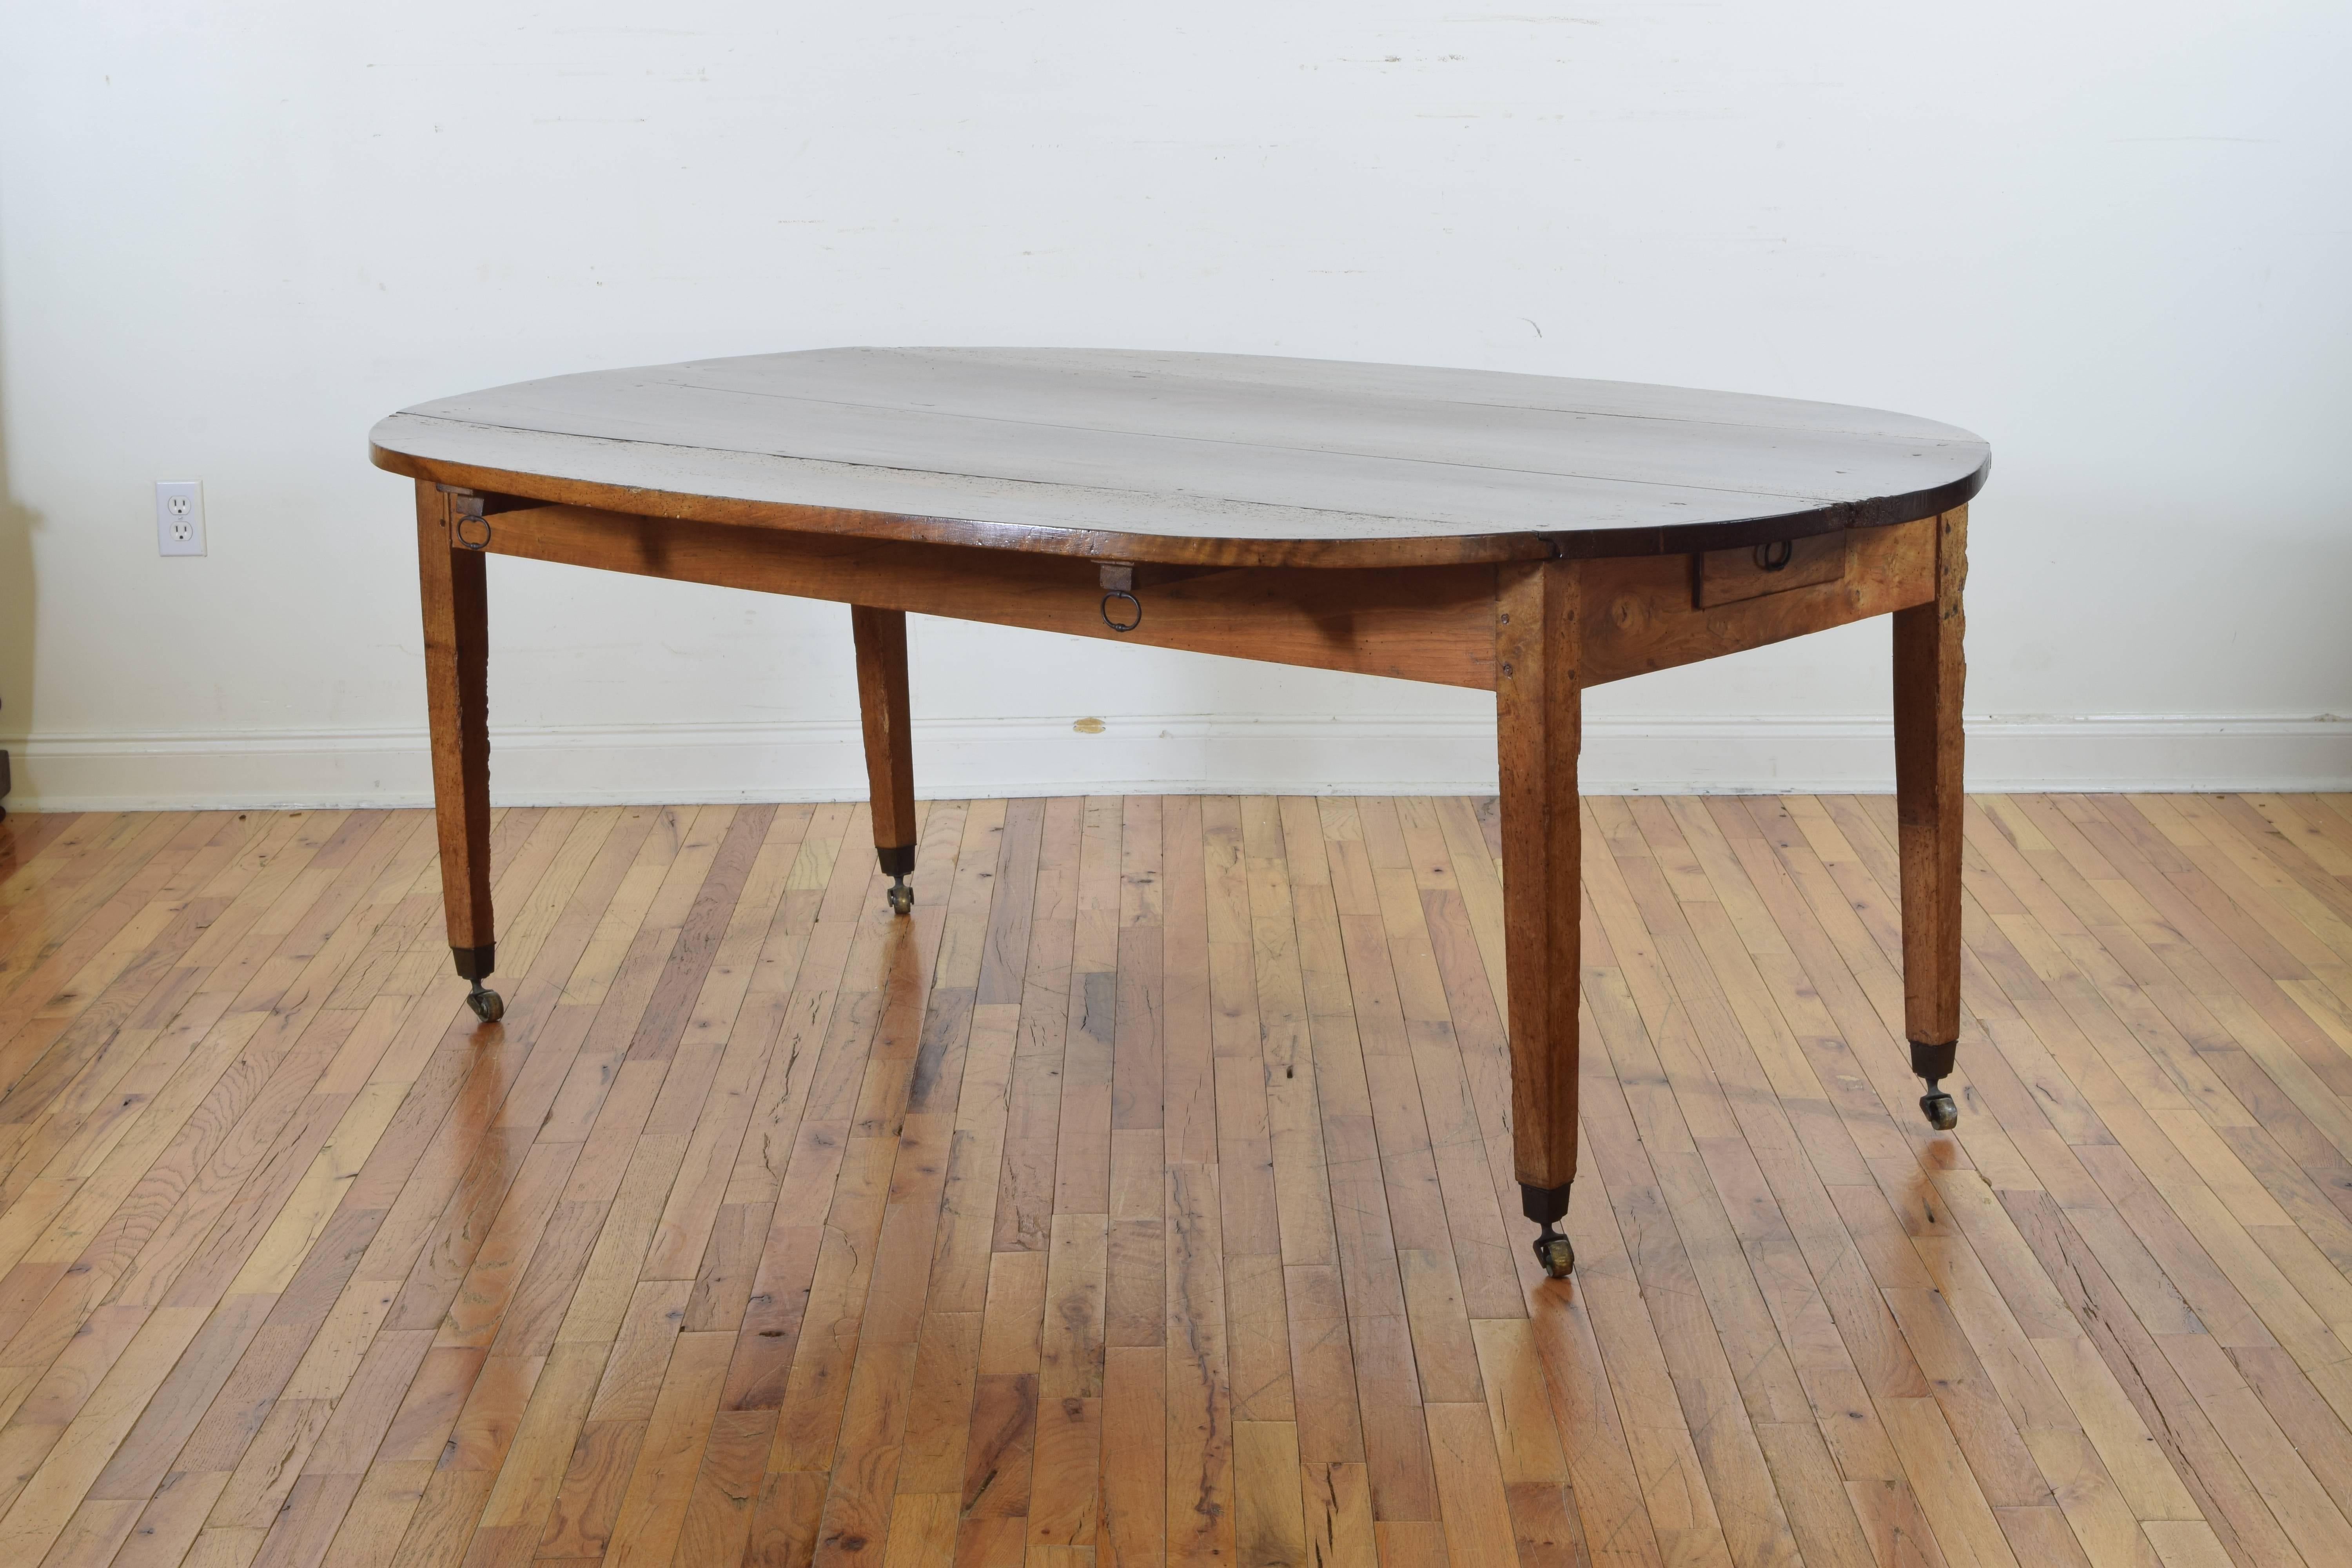 The rectangular top flanked by two drop leaves when extended forming an elongated oval, the case housing one drawer and four pull-out supports for leaves, raised on square tapering legs with original brass castors, listed measurements are for table